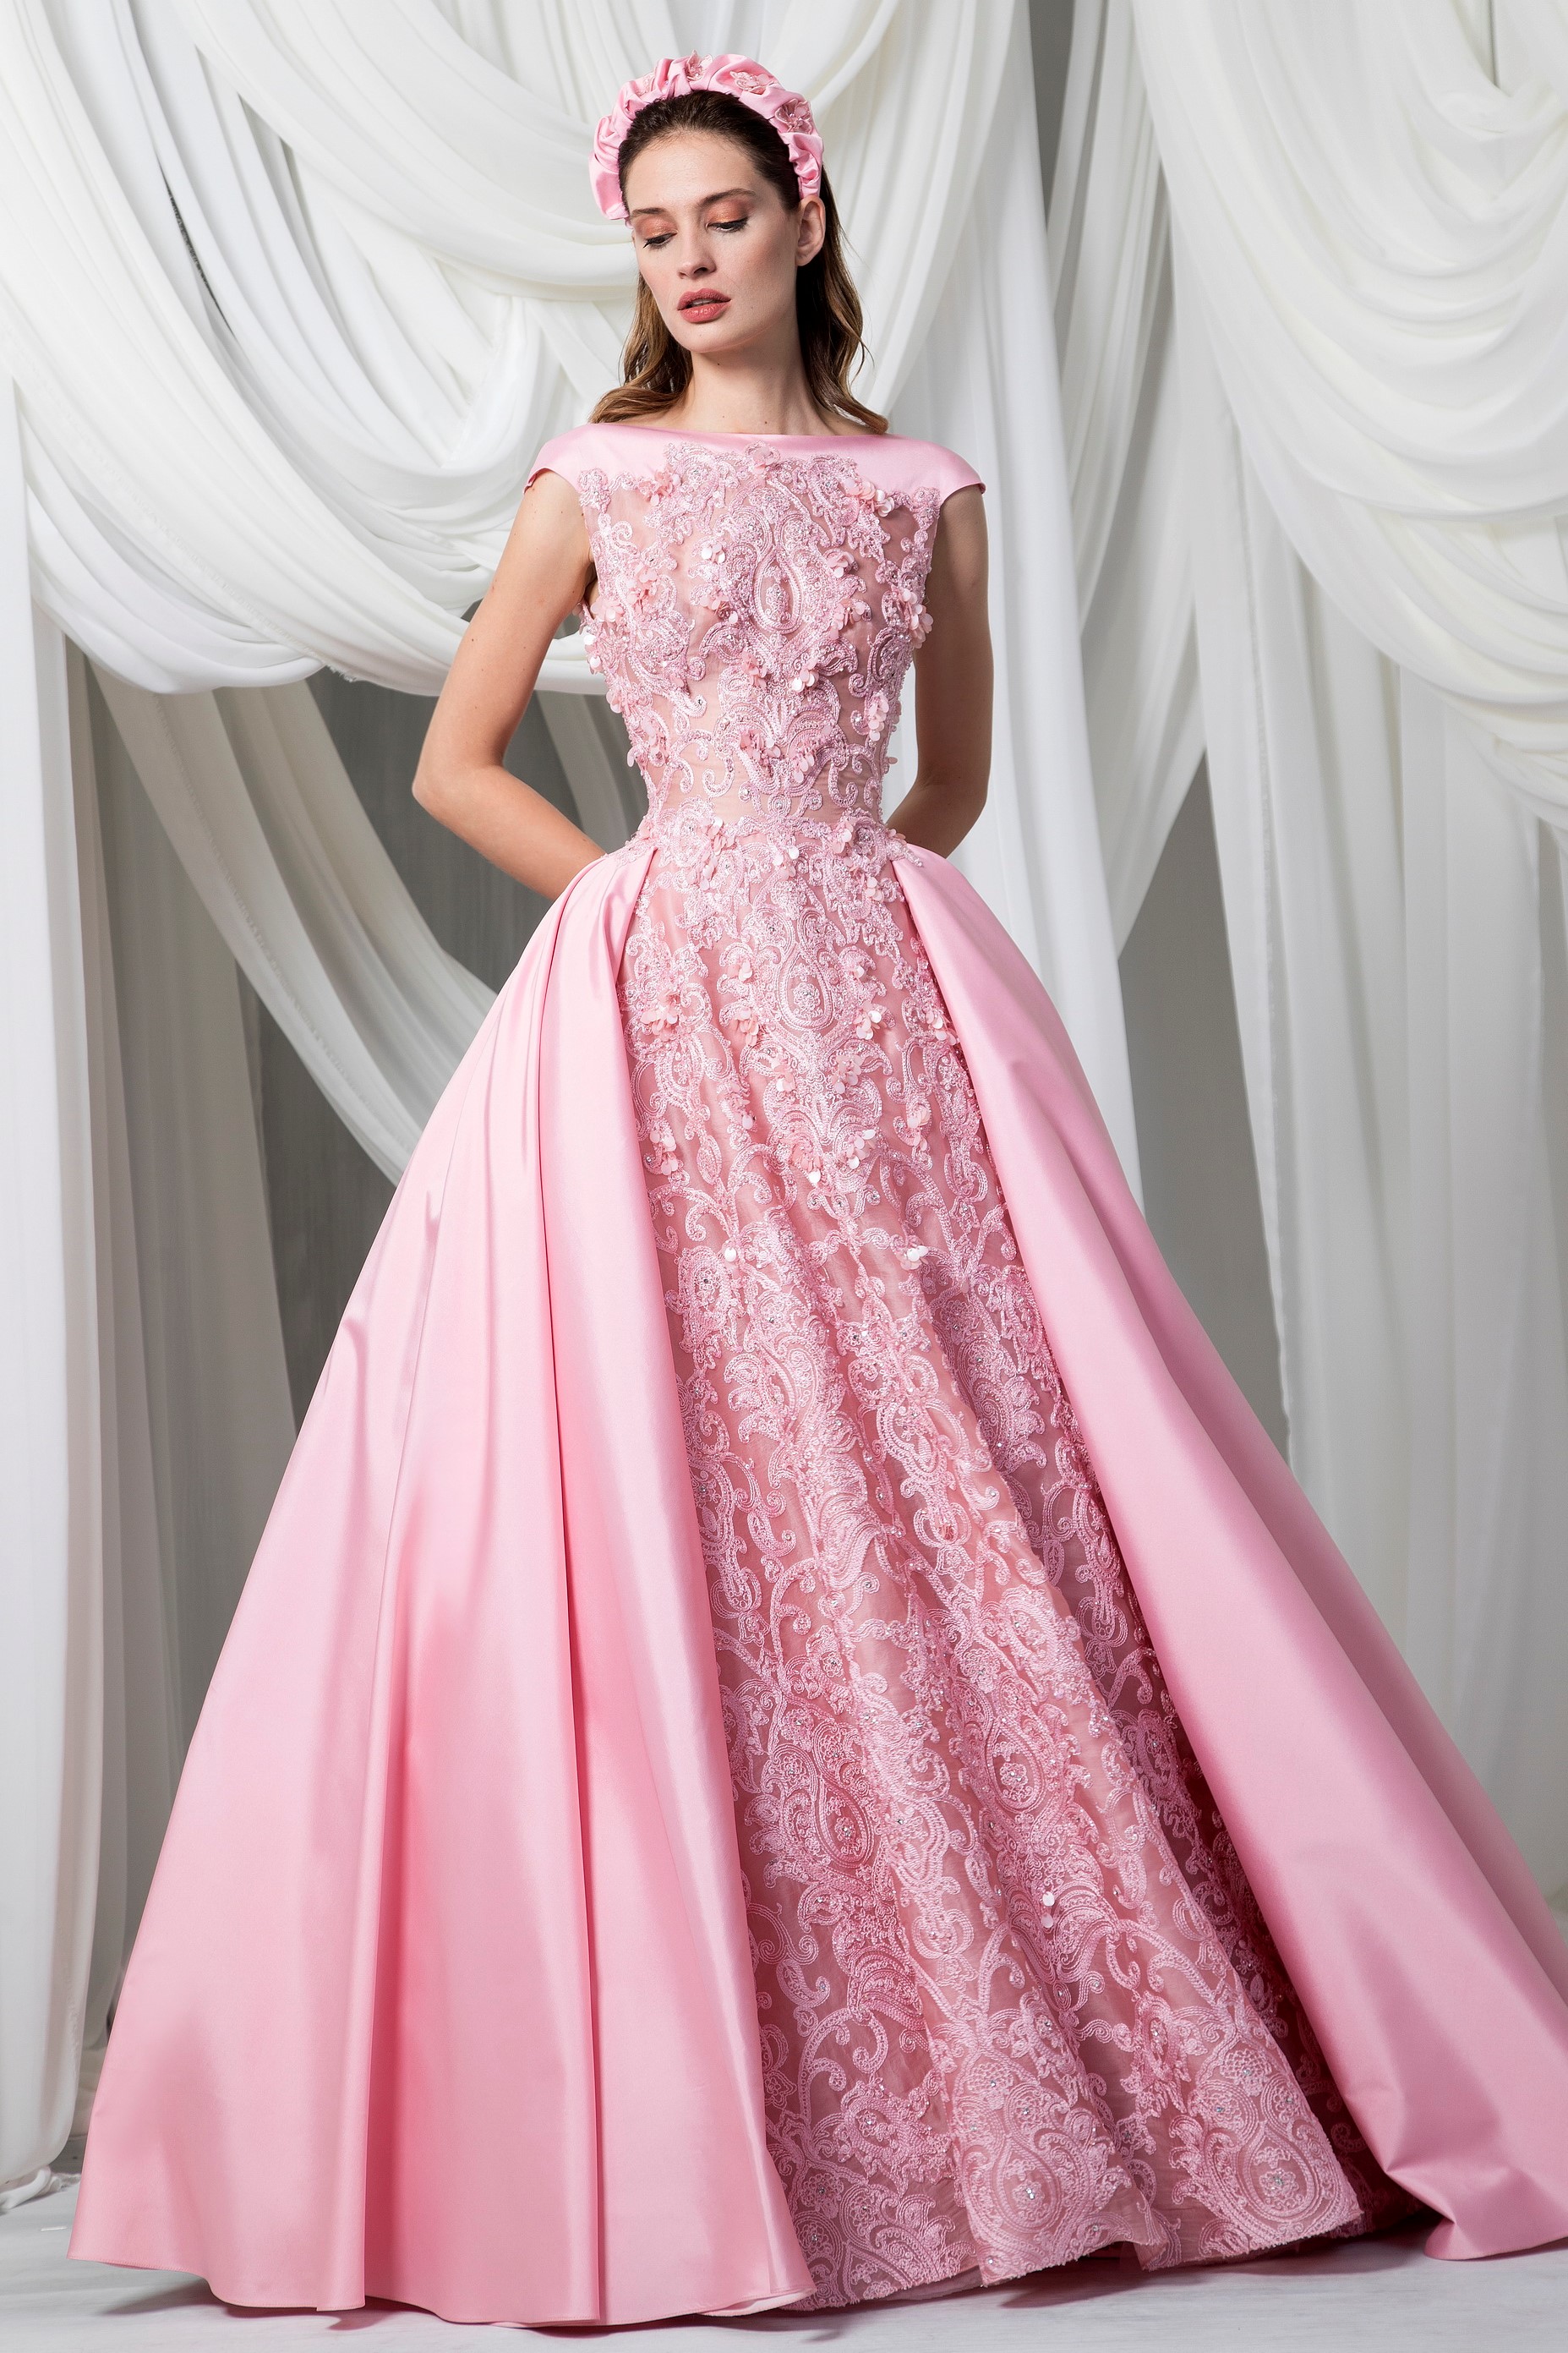 Cap Sleeve Sequined Chiffon Formal Dress With Draping And Illusion Back -  June Bridals